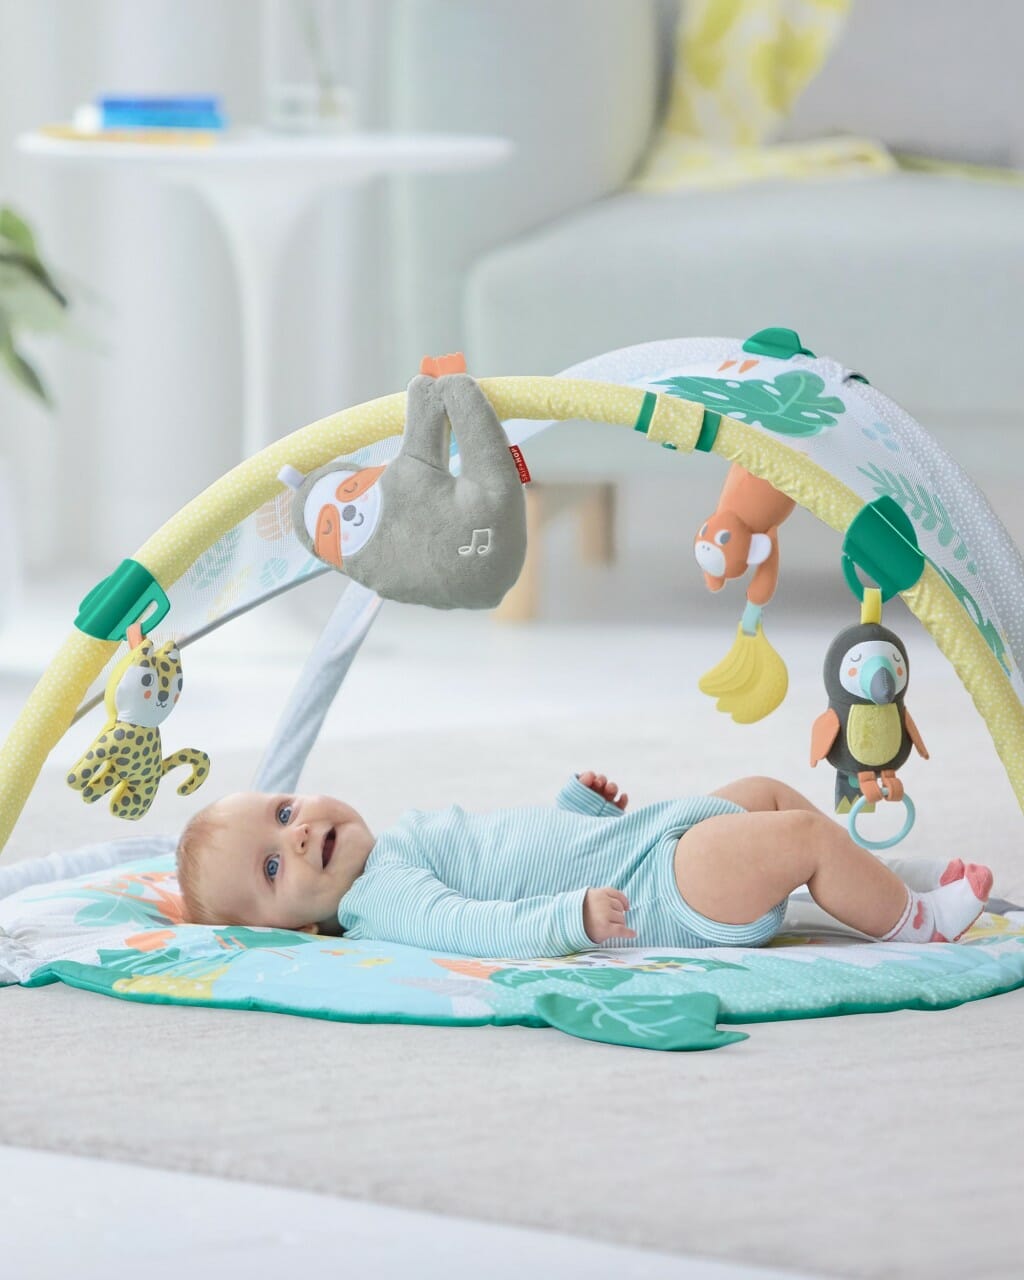 Skip Hop Tropical Paradise Activity Gym & Soother Lifestyle 2